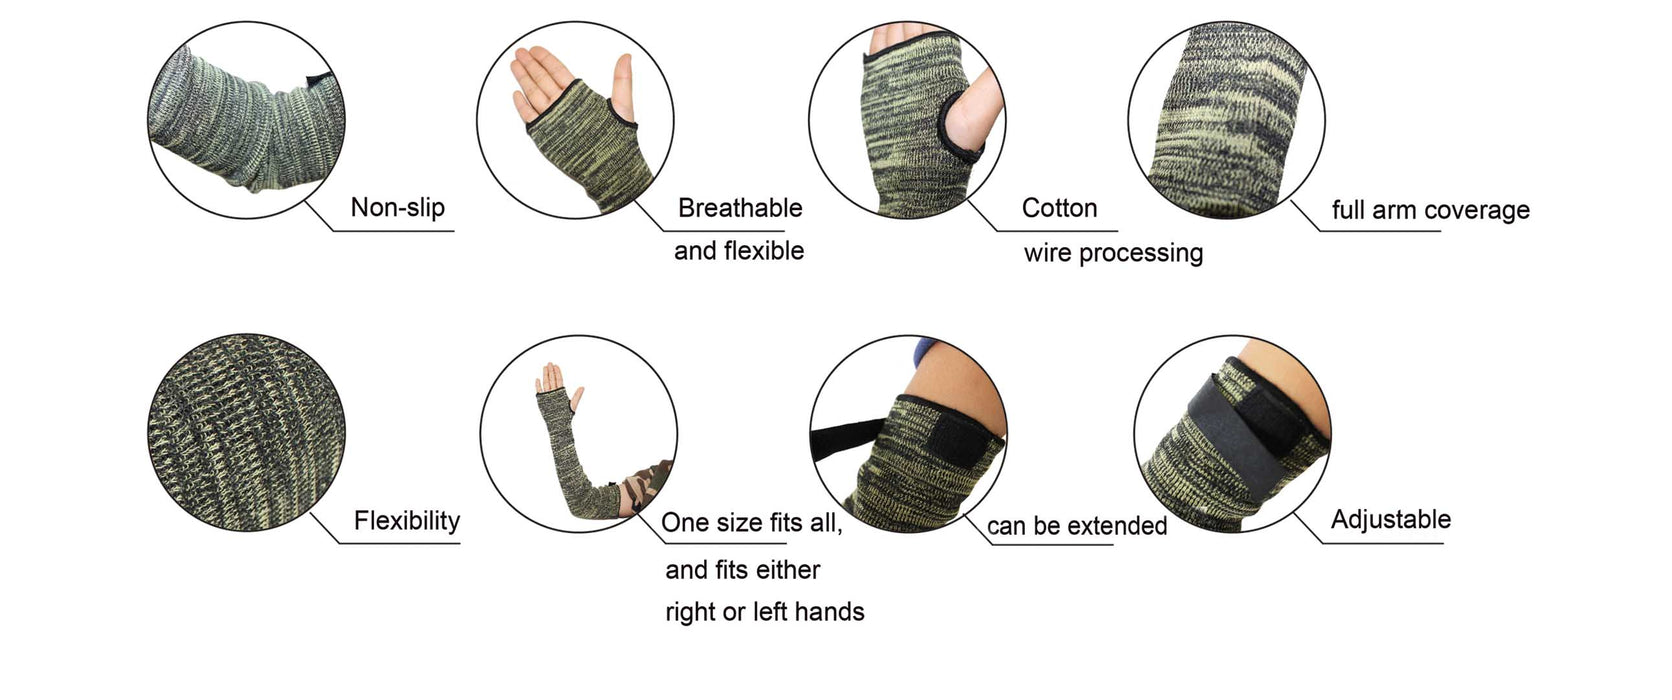 Cut Resistant Sleeve with Thumb Slot, Food Grade Safety Protection Arm Sleeve